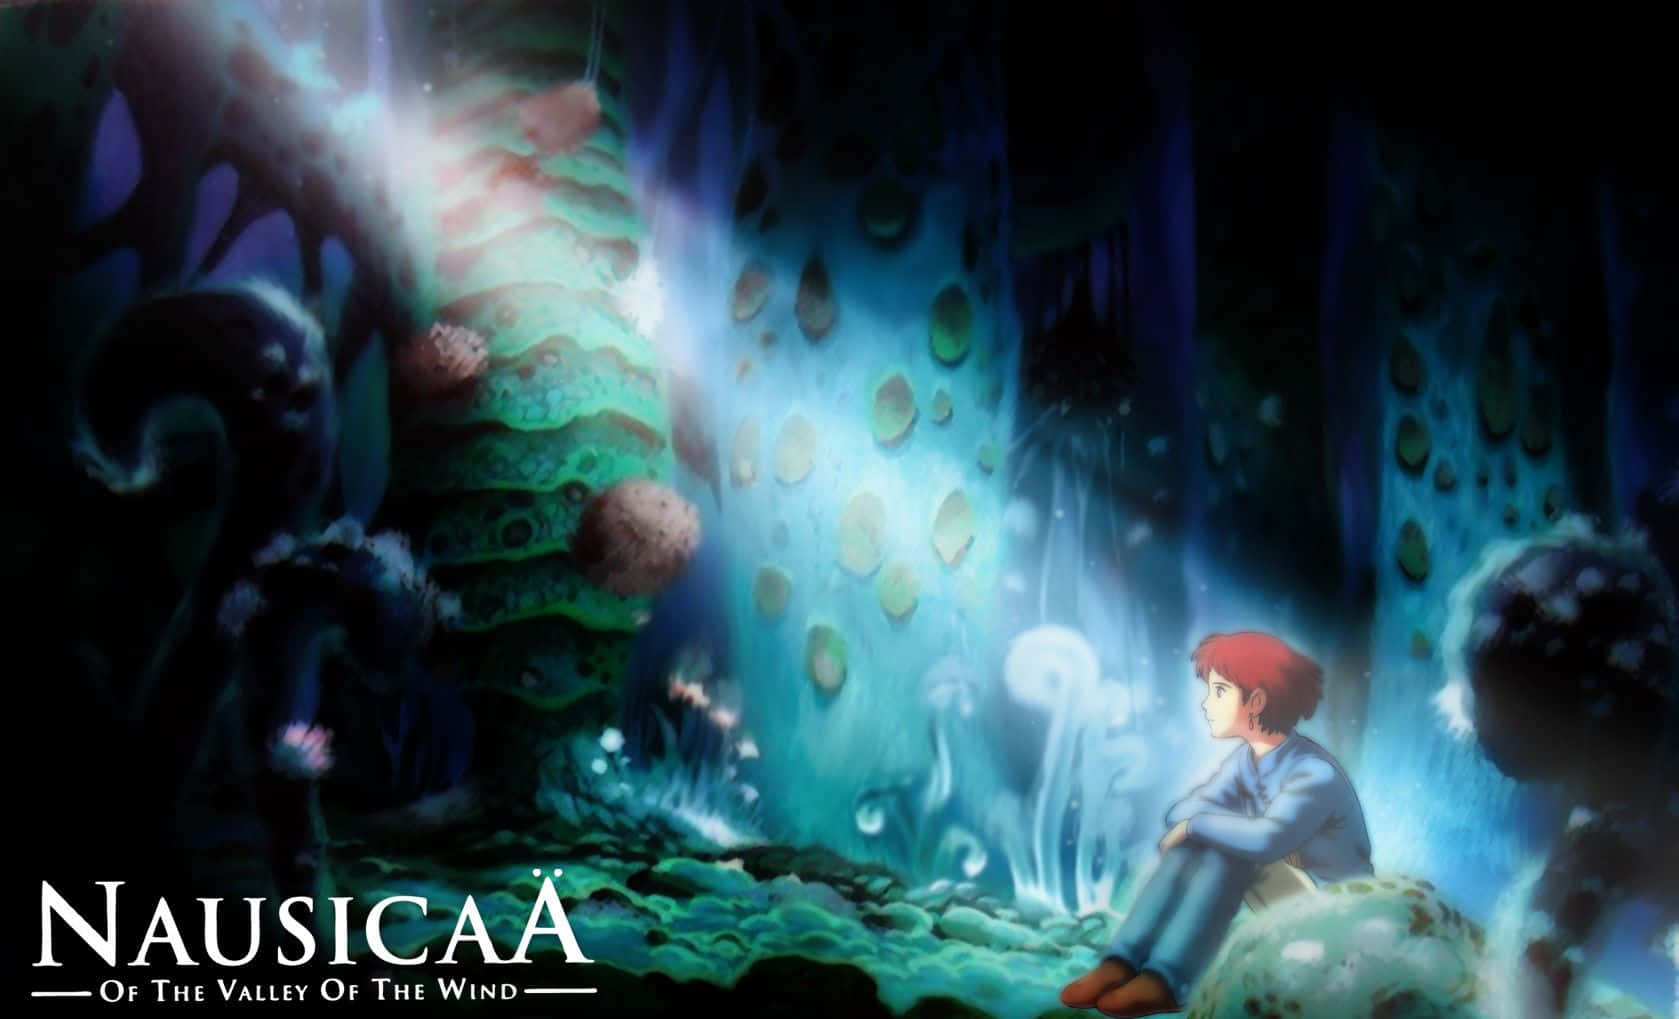 Nausicaä Riding her Jet-powered Glider in the Valley of the Wind Wallpaper